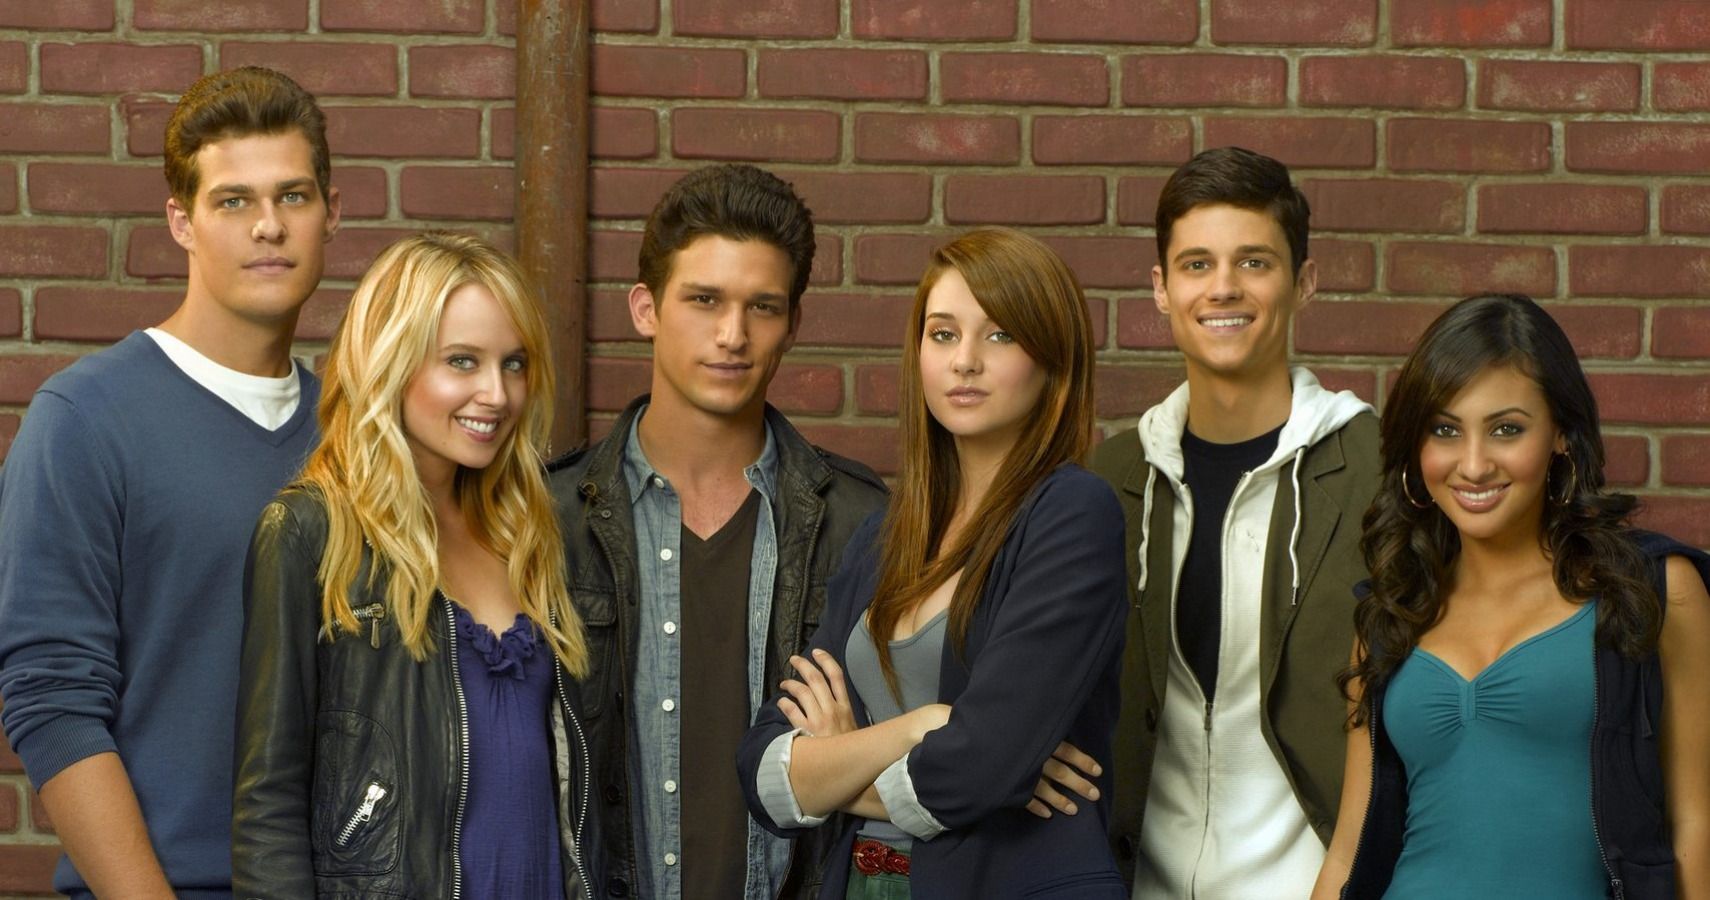 10 Best Episodes Of The Secret Life Of The American Teenager According To Imdb